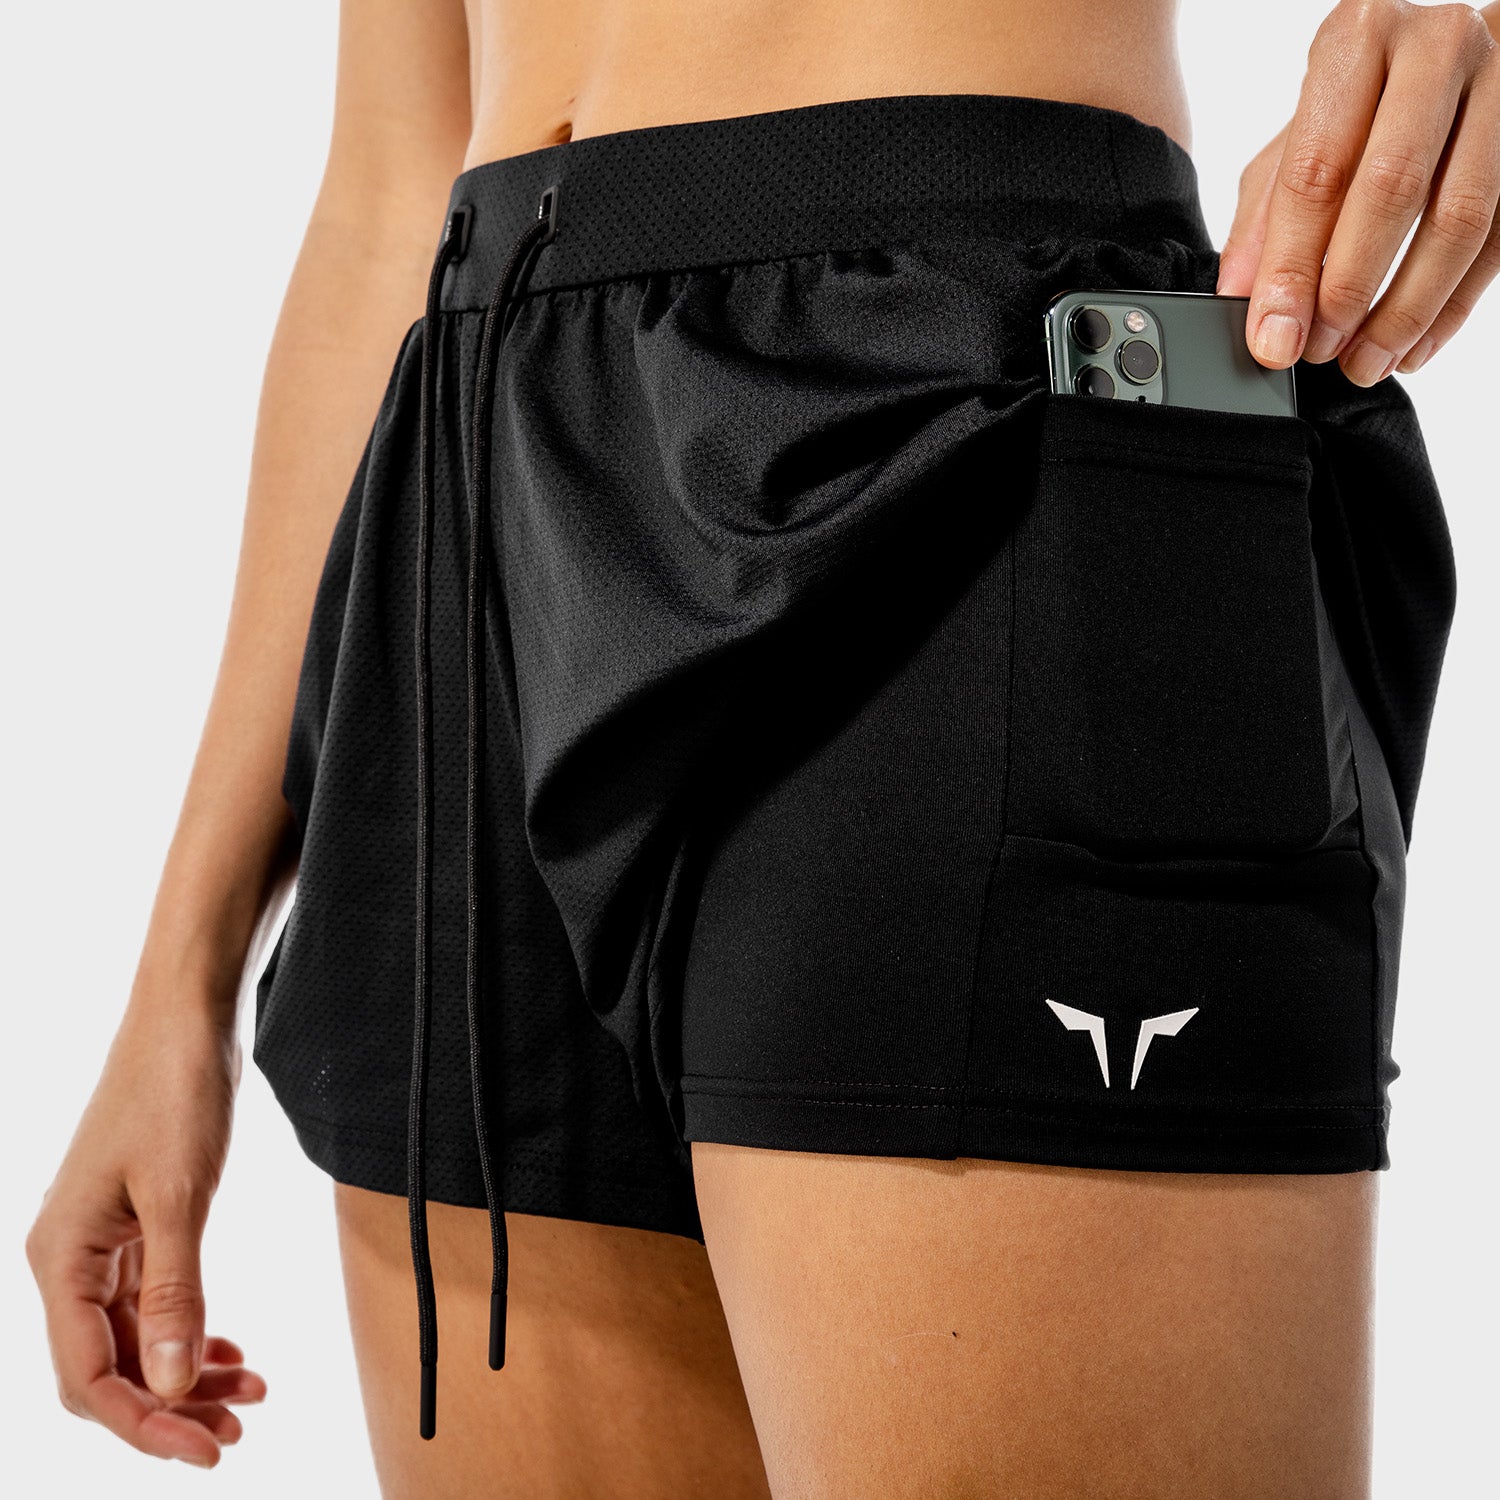 squatwolf-workout-clothes-flux-2-in-1-shorts-black-gym-shorts-for-women